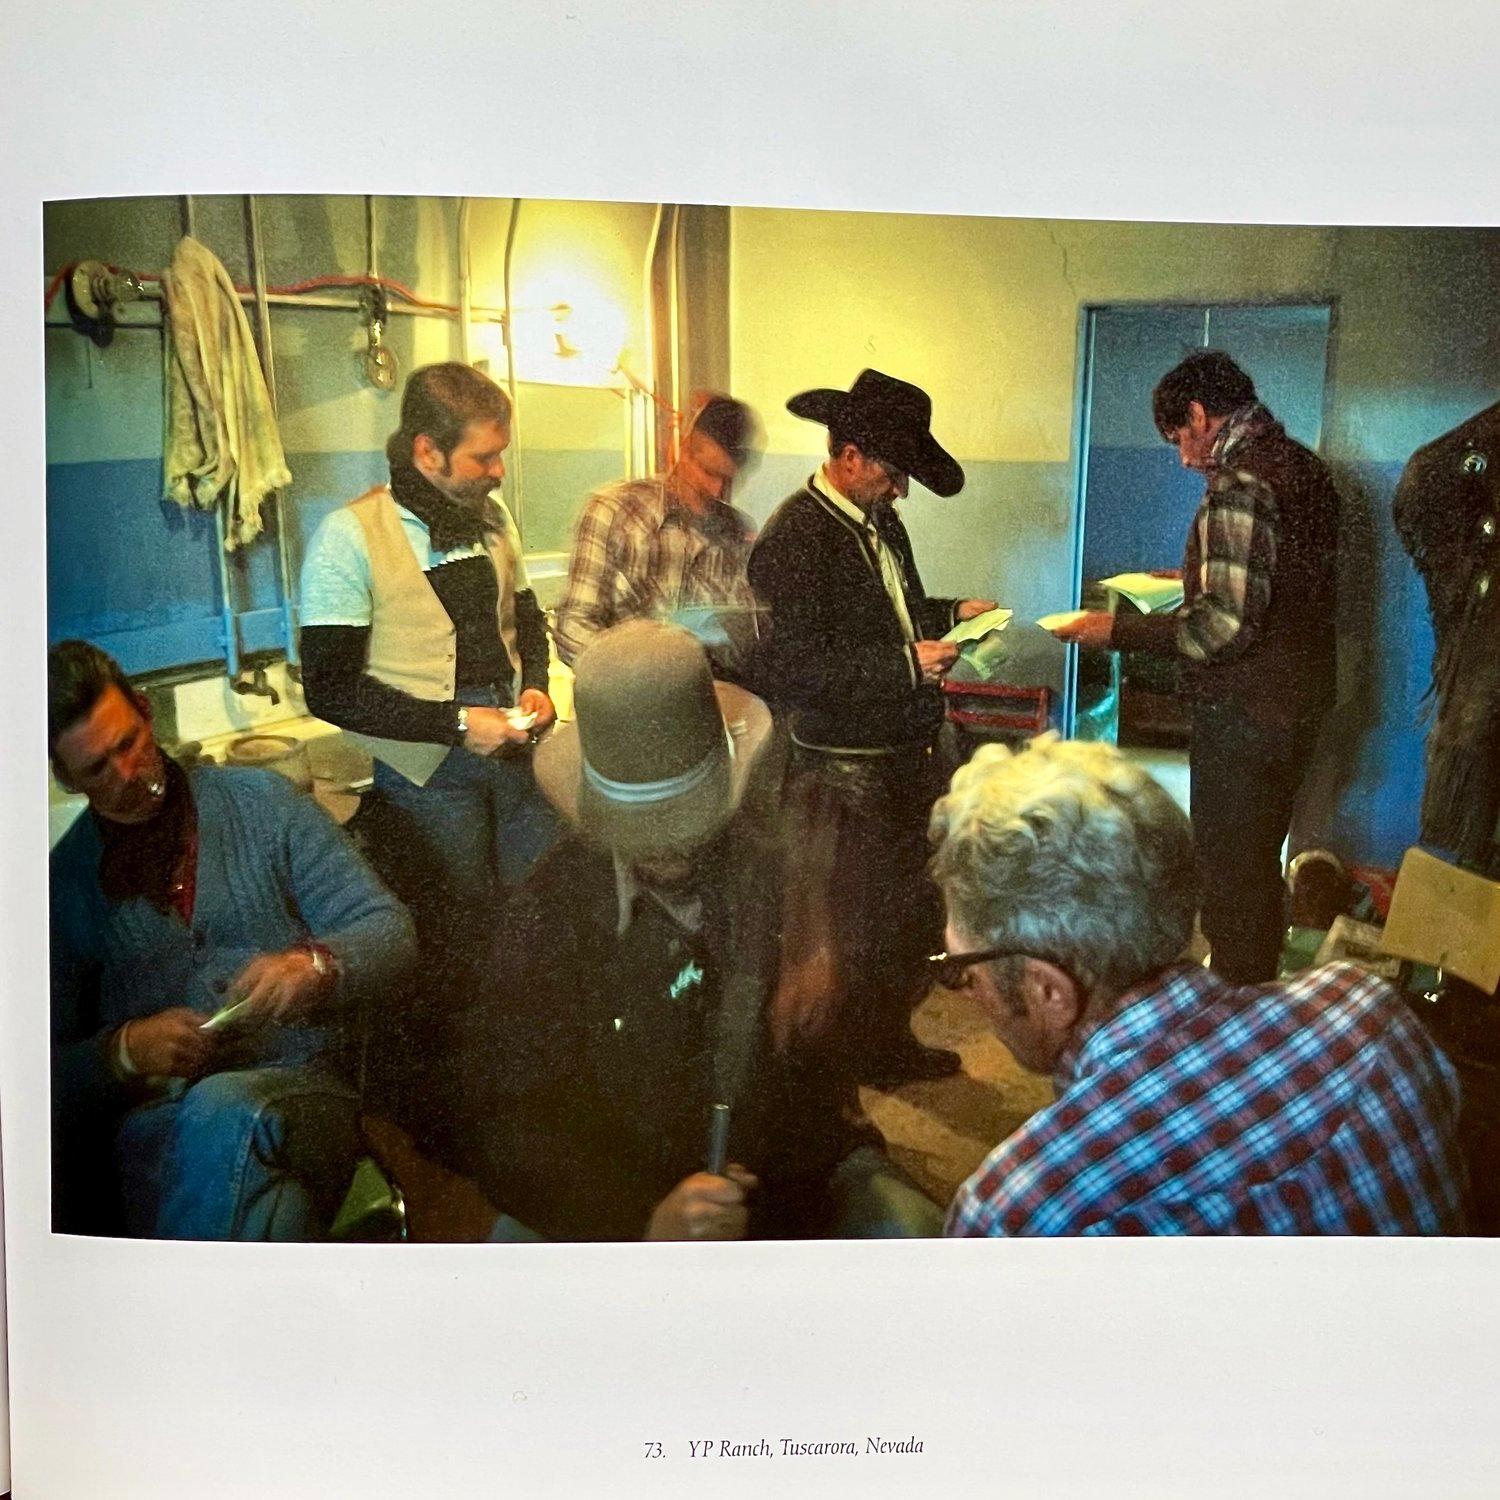 First Edition, published by Little, Brown & Company, Boston, 1987

The photographs collected in 'Buckaroo: Images From the Sagebrush Basin' show why Kurt Markus's photographs of cowboys, ranches and the American West remain so acclaimed. Classic,